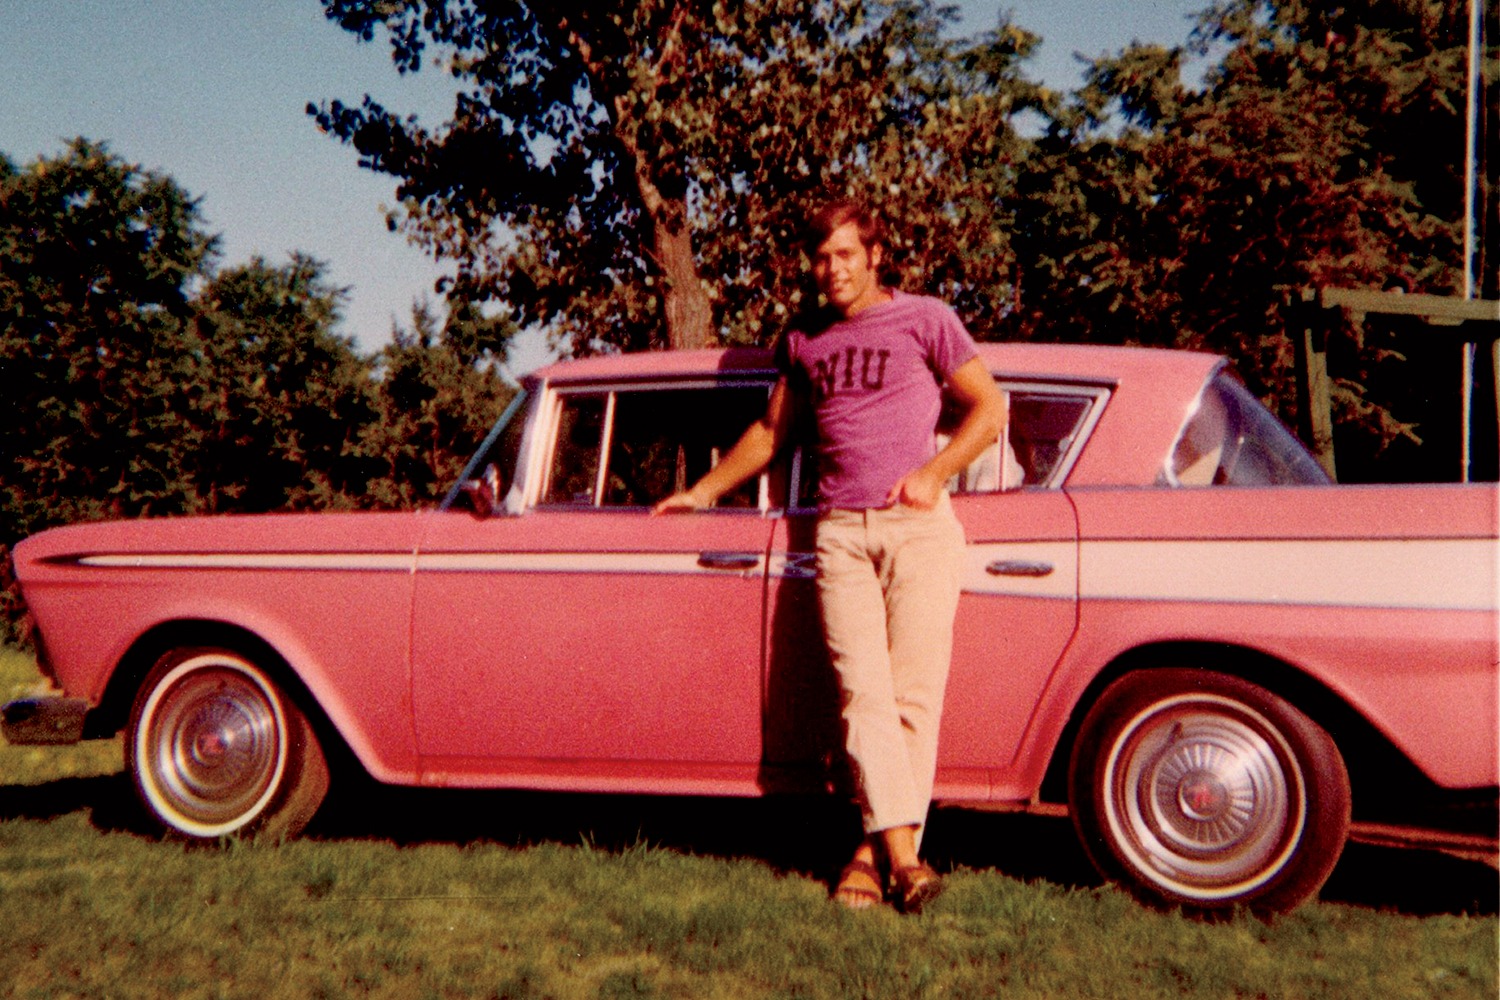 Man standing in front of pink car